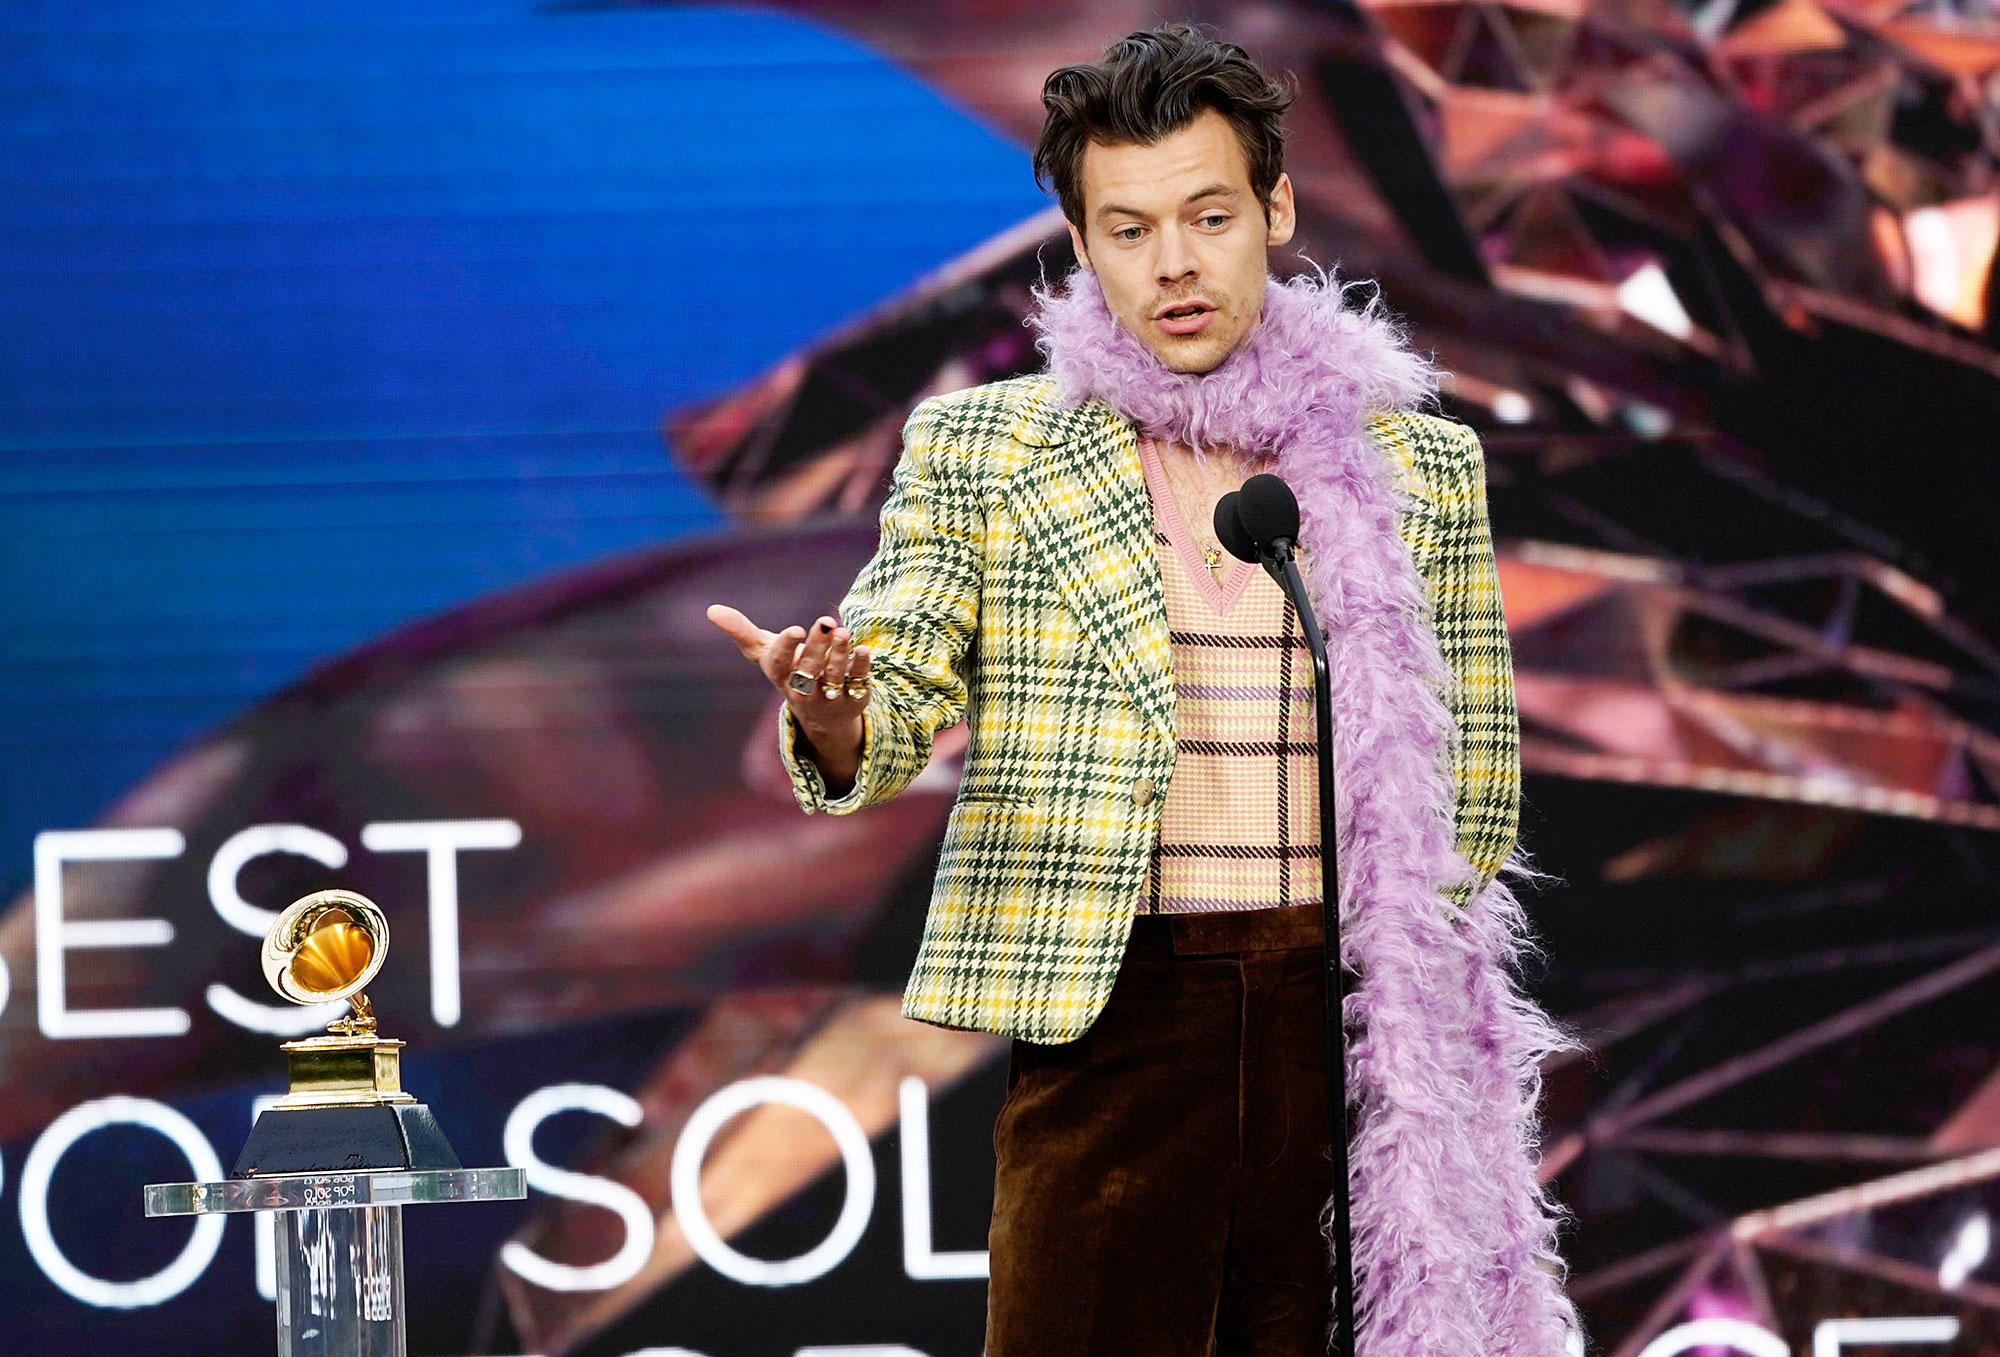 Why Harry Styles’ Grammys 2021 Acceptance Speech Was Bleeped Out